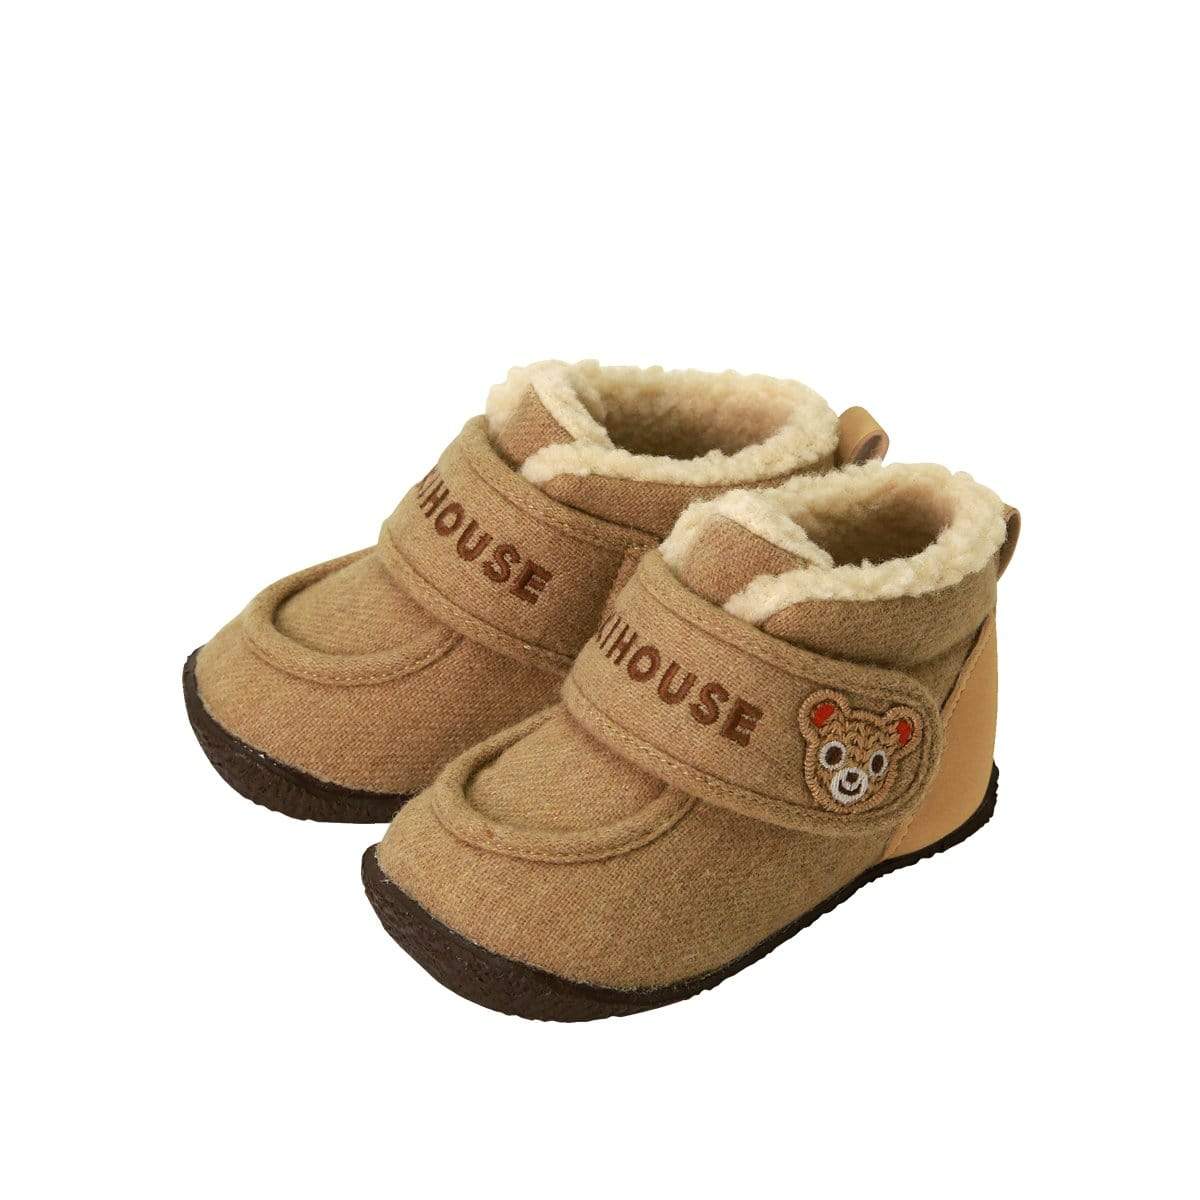 Miki House First baby shoes of brushed material - Beige -HYPHEN KIDS